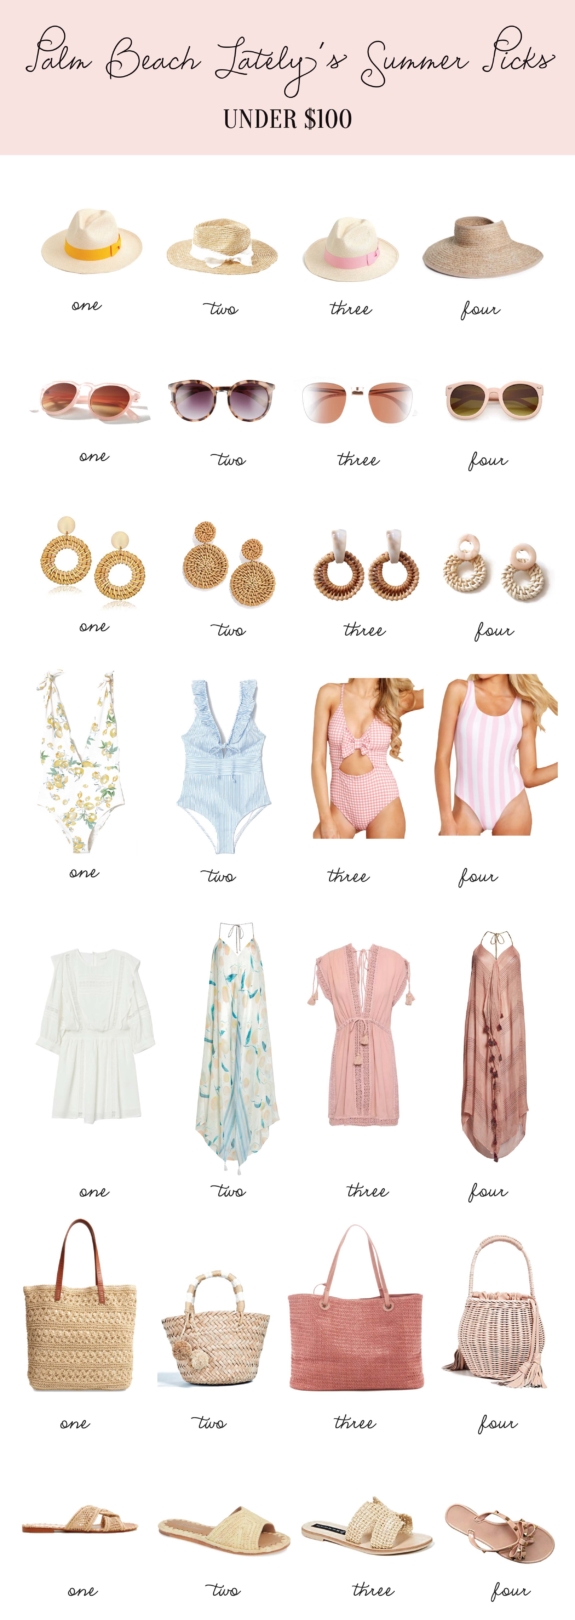 Swimsuits, Earrings, Coverups, Bathing Suits, Sandals